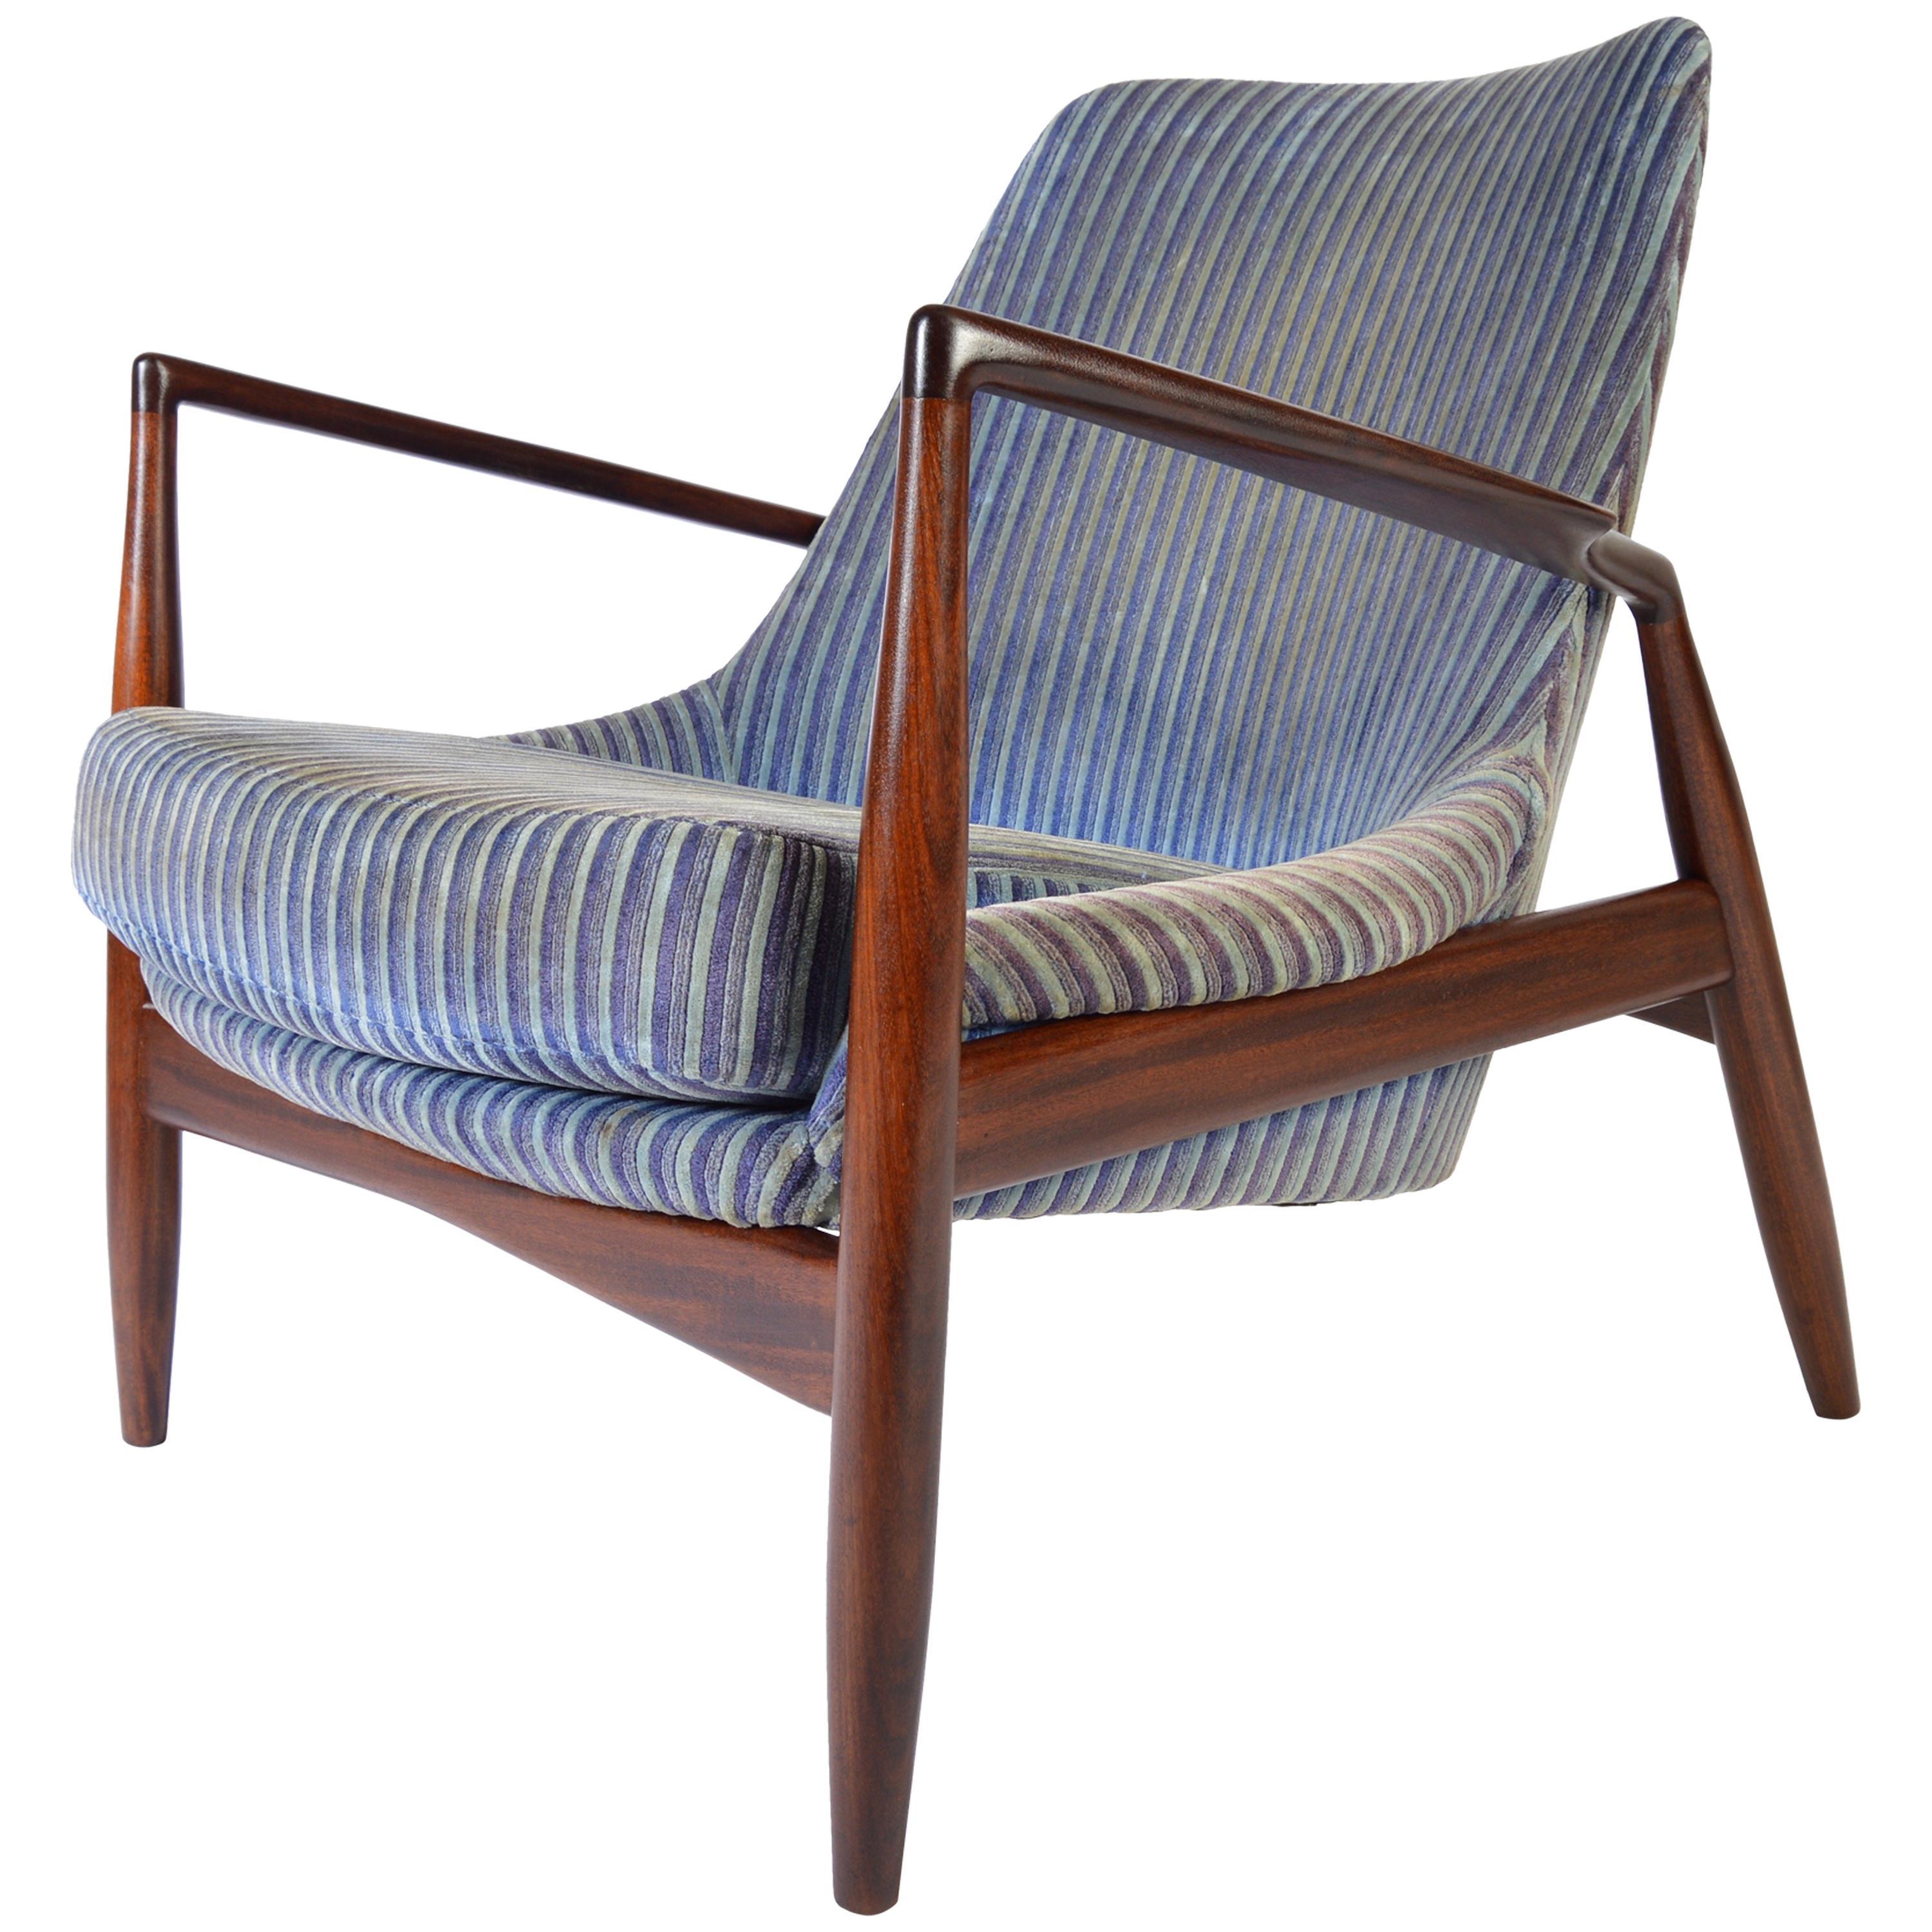 IB Kofod Larsen "Seal" Lounge Chair for OPE Sweden, 1956